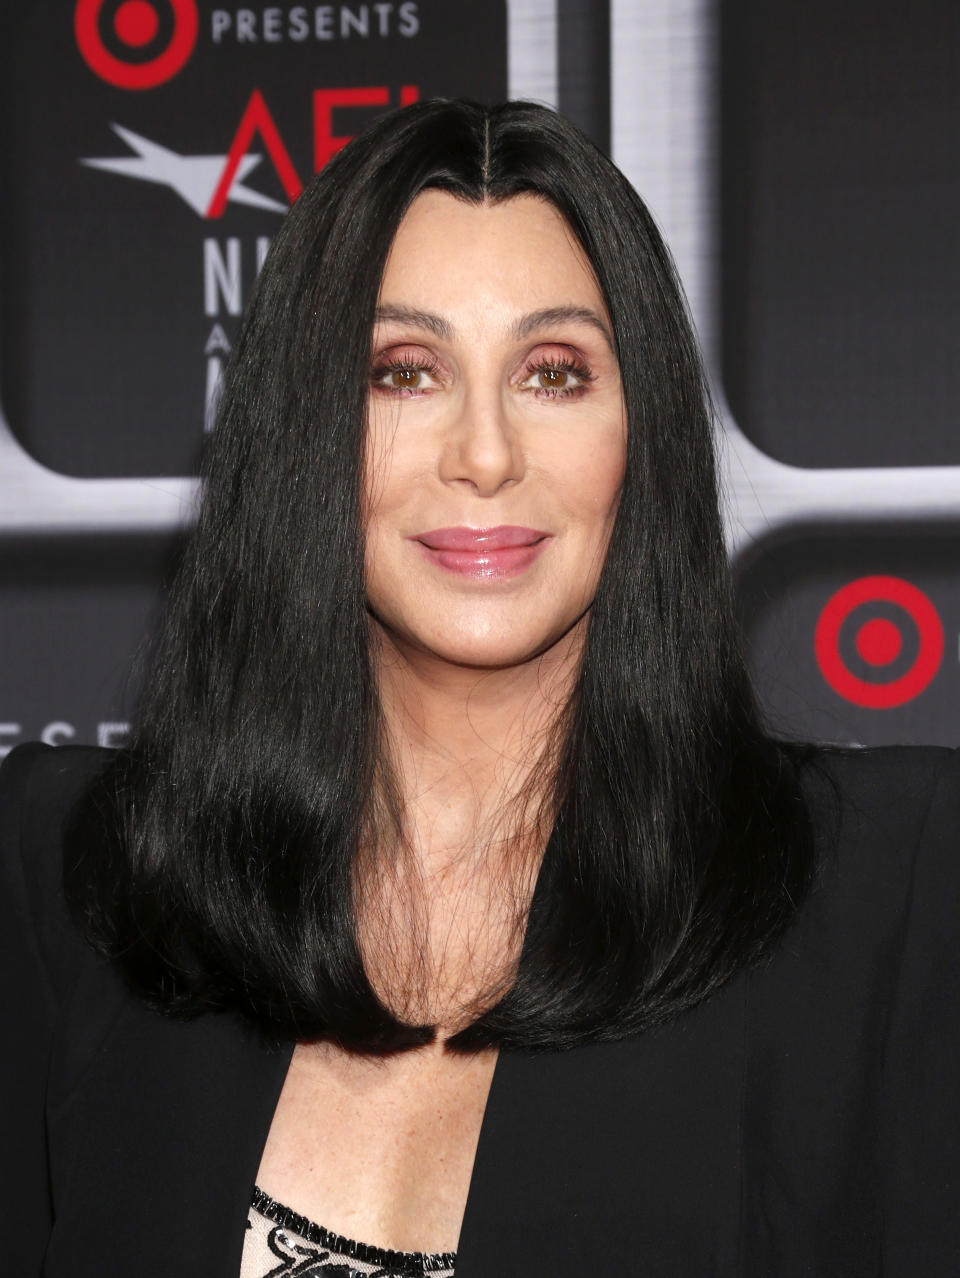 FILE - This April 24, 2013 file photo shows performer Cher at the AFI Night at the Movies at the ArcLight in Los Angeles. Cher will be performing on the singing competition series "The Voice" during the season finale on Tuesday, June 18. She will perform “Woman’s World” the first single off of her upcoming album. (Photo by Todd Williamson/Invision/AP, file)